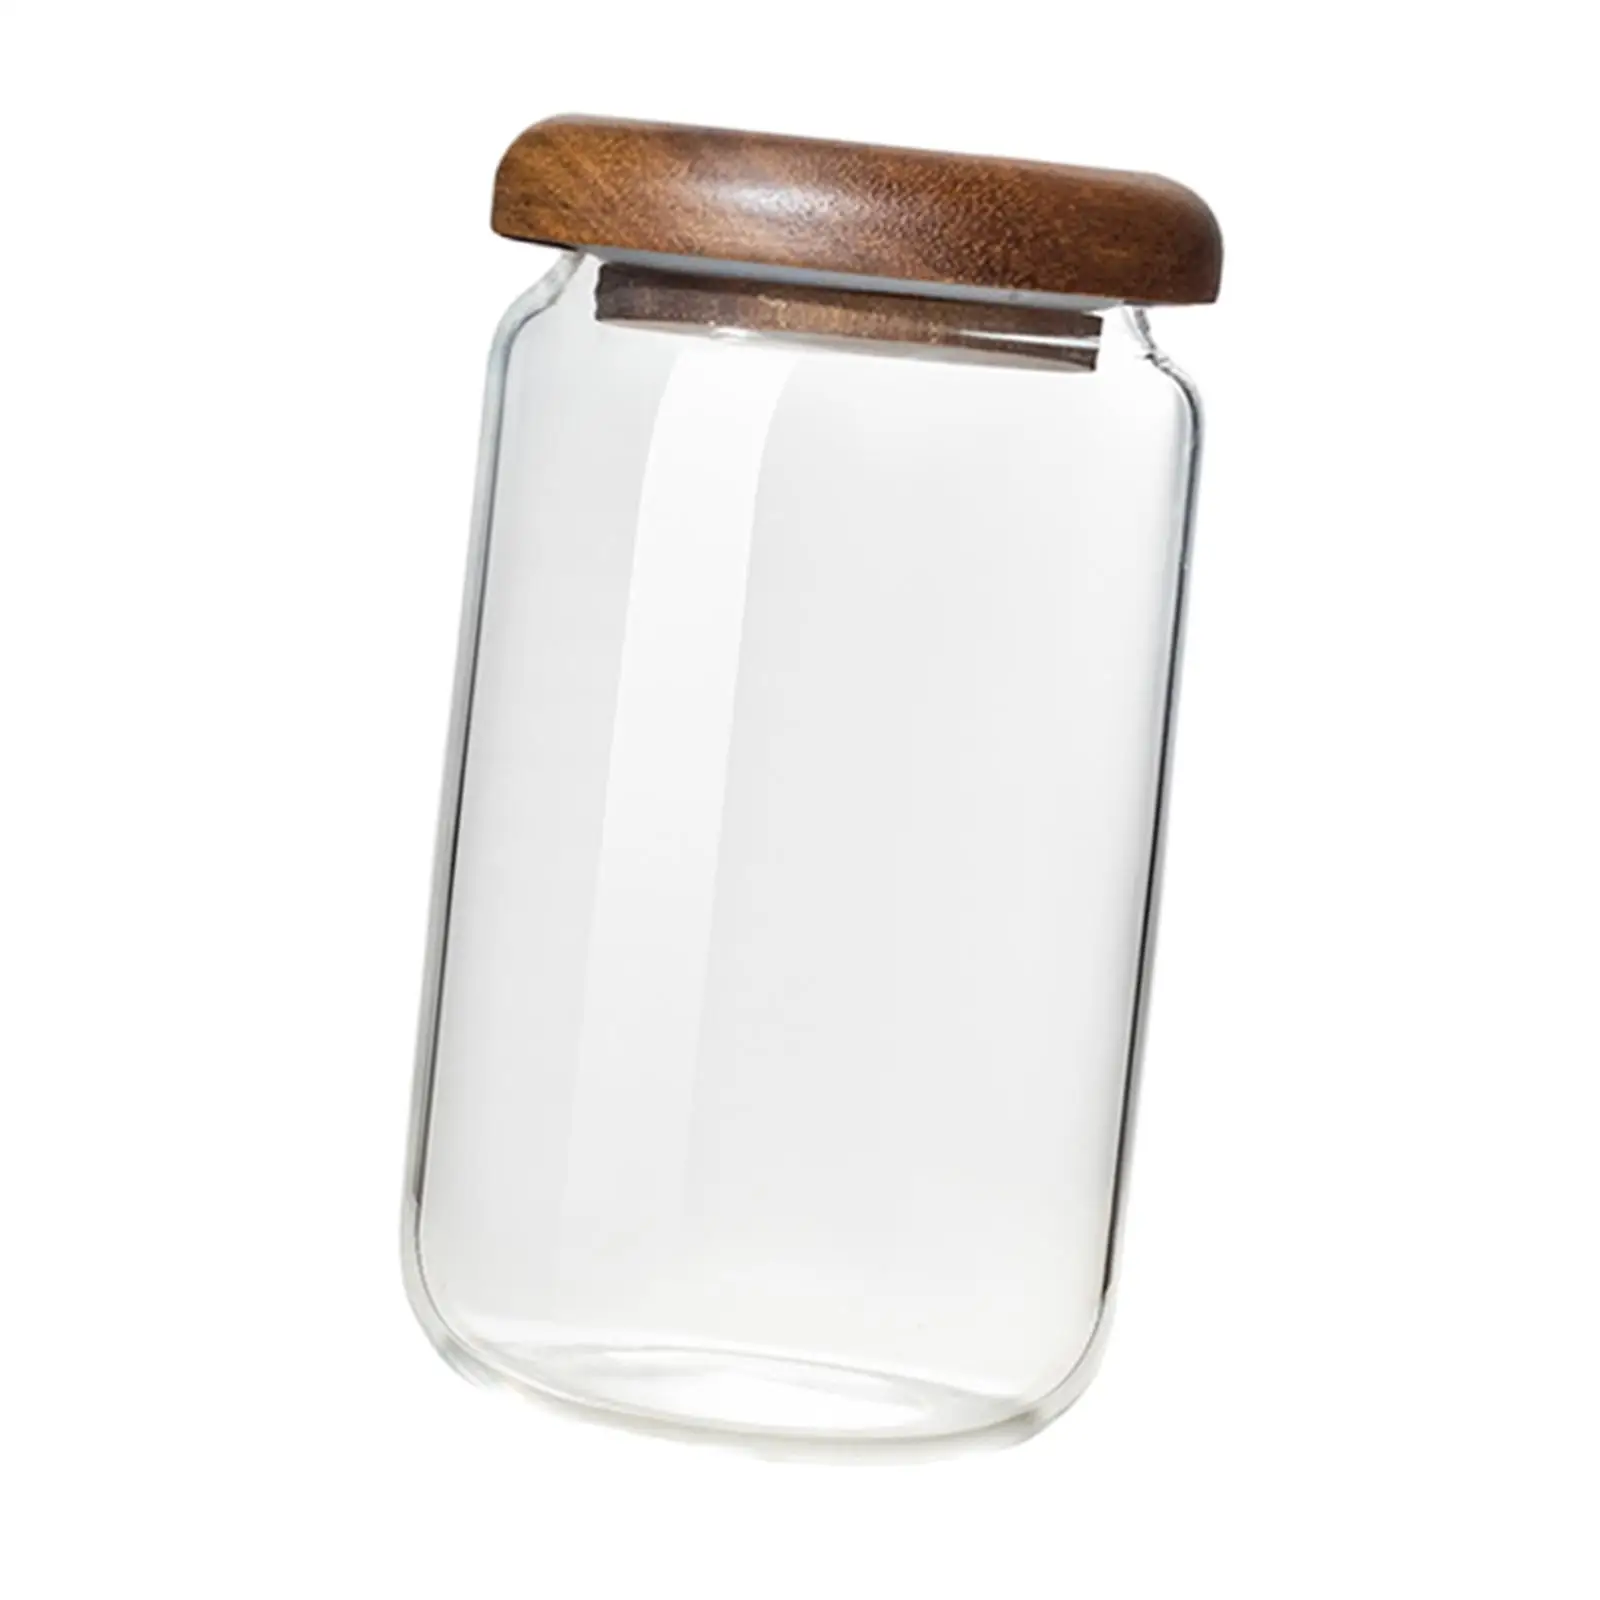 Glass Storage Jar with Wood Lid Reusable Counter Top Organizer Kitchen Canister for Candy Tea Spices Dry Goods Coffee Beans